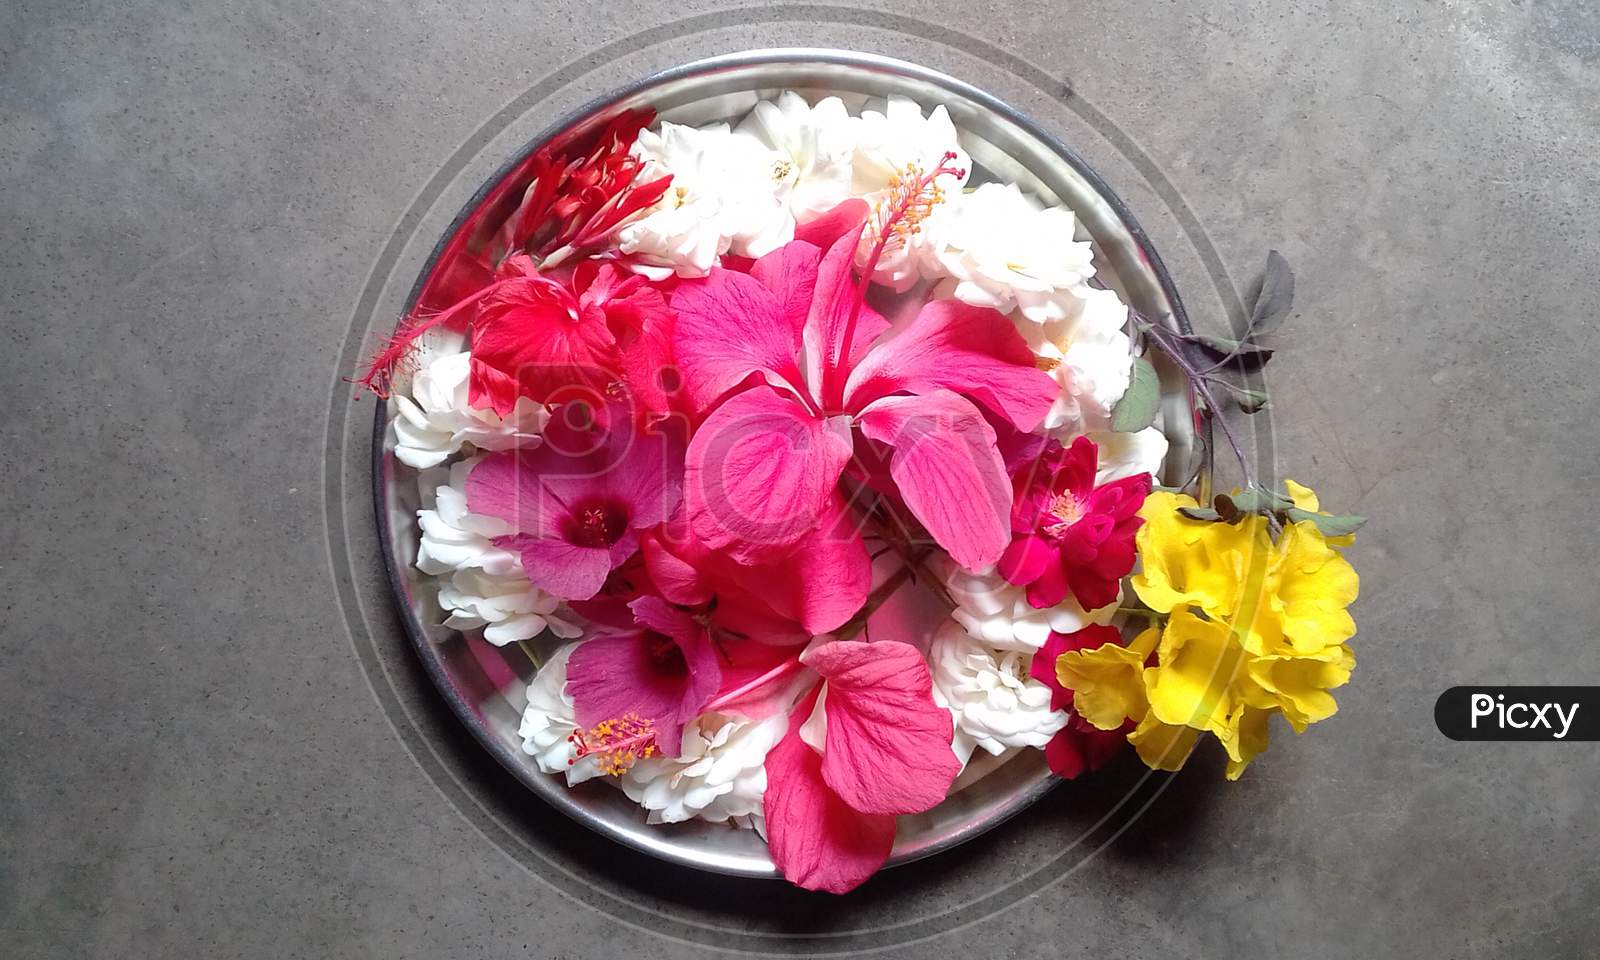 conglomeration of different flowers in a plate